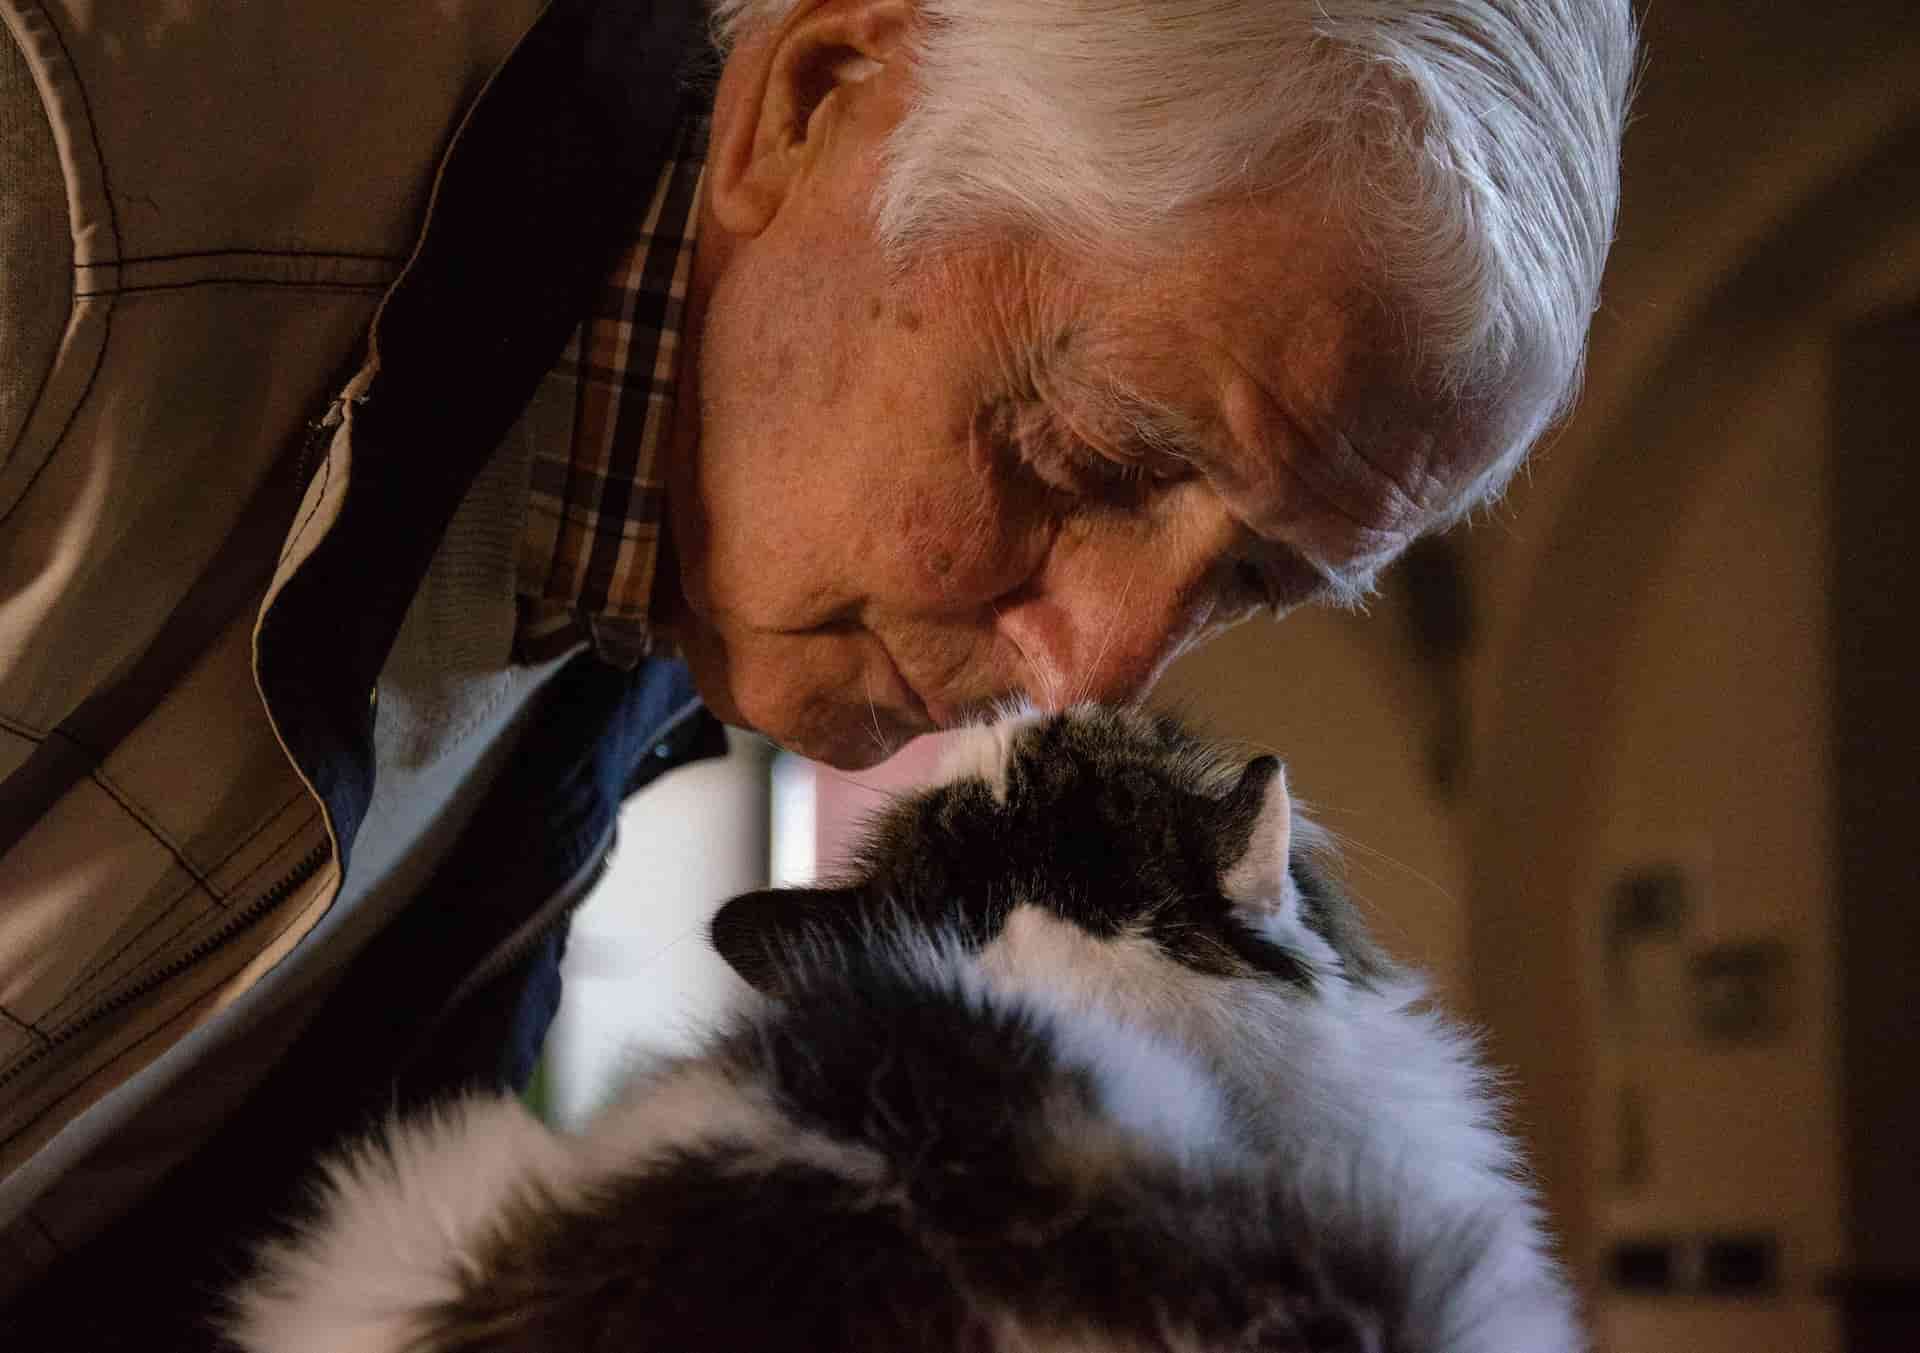 An older man affectionately nuzzles his cat, who also does so in return.